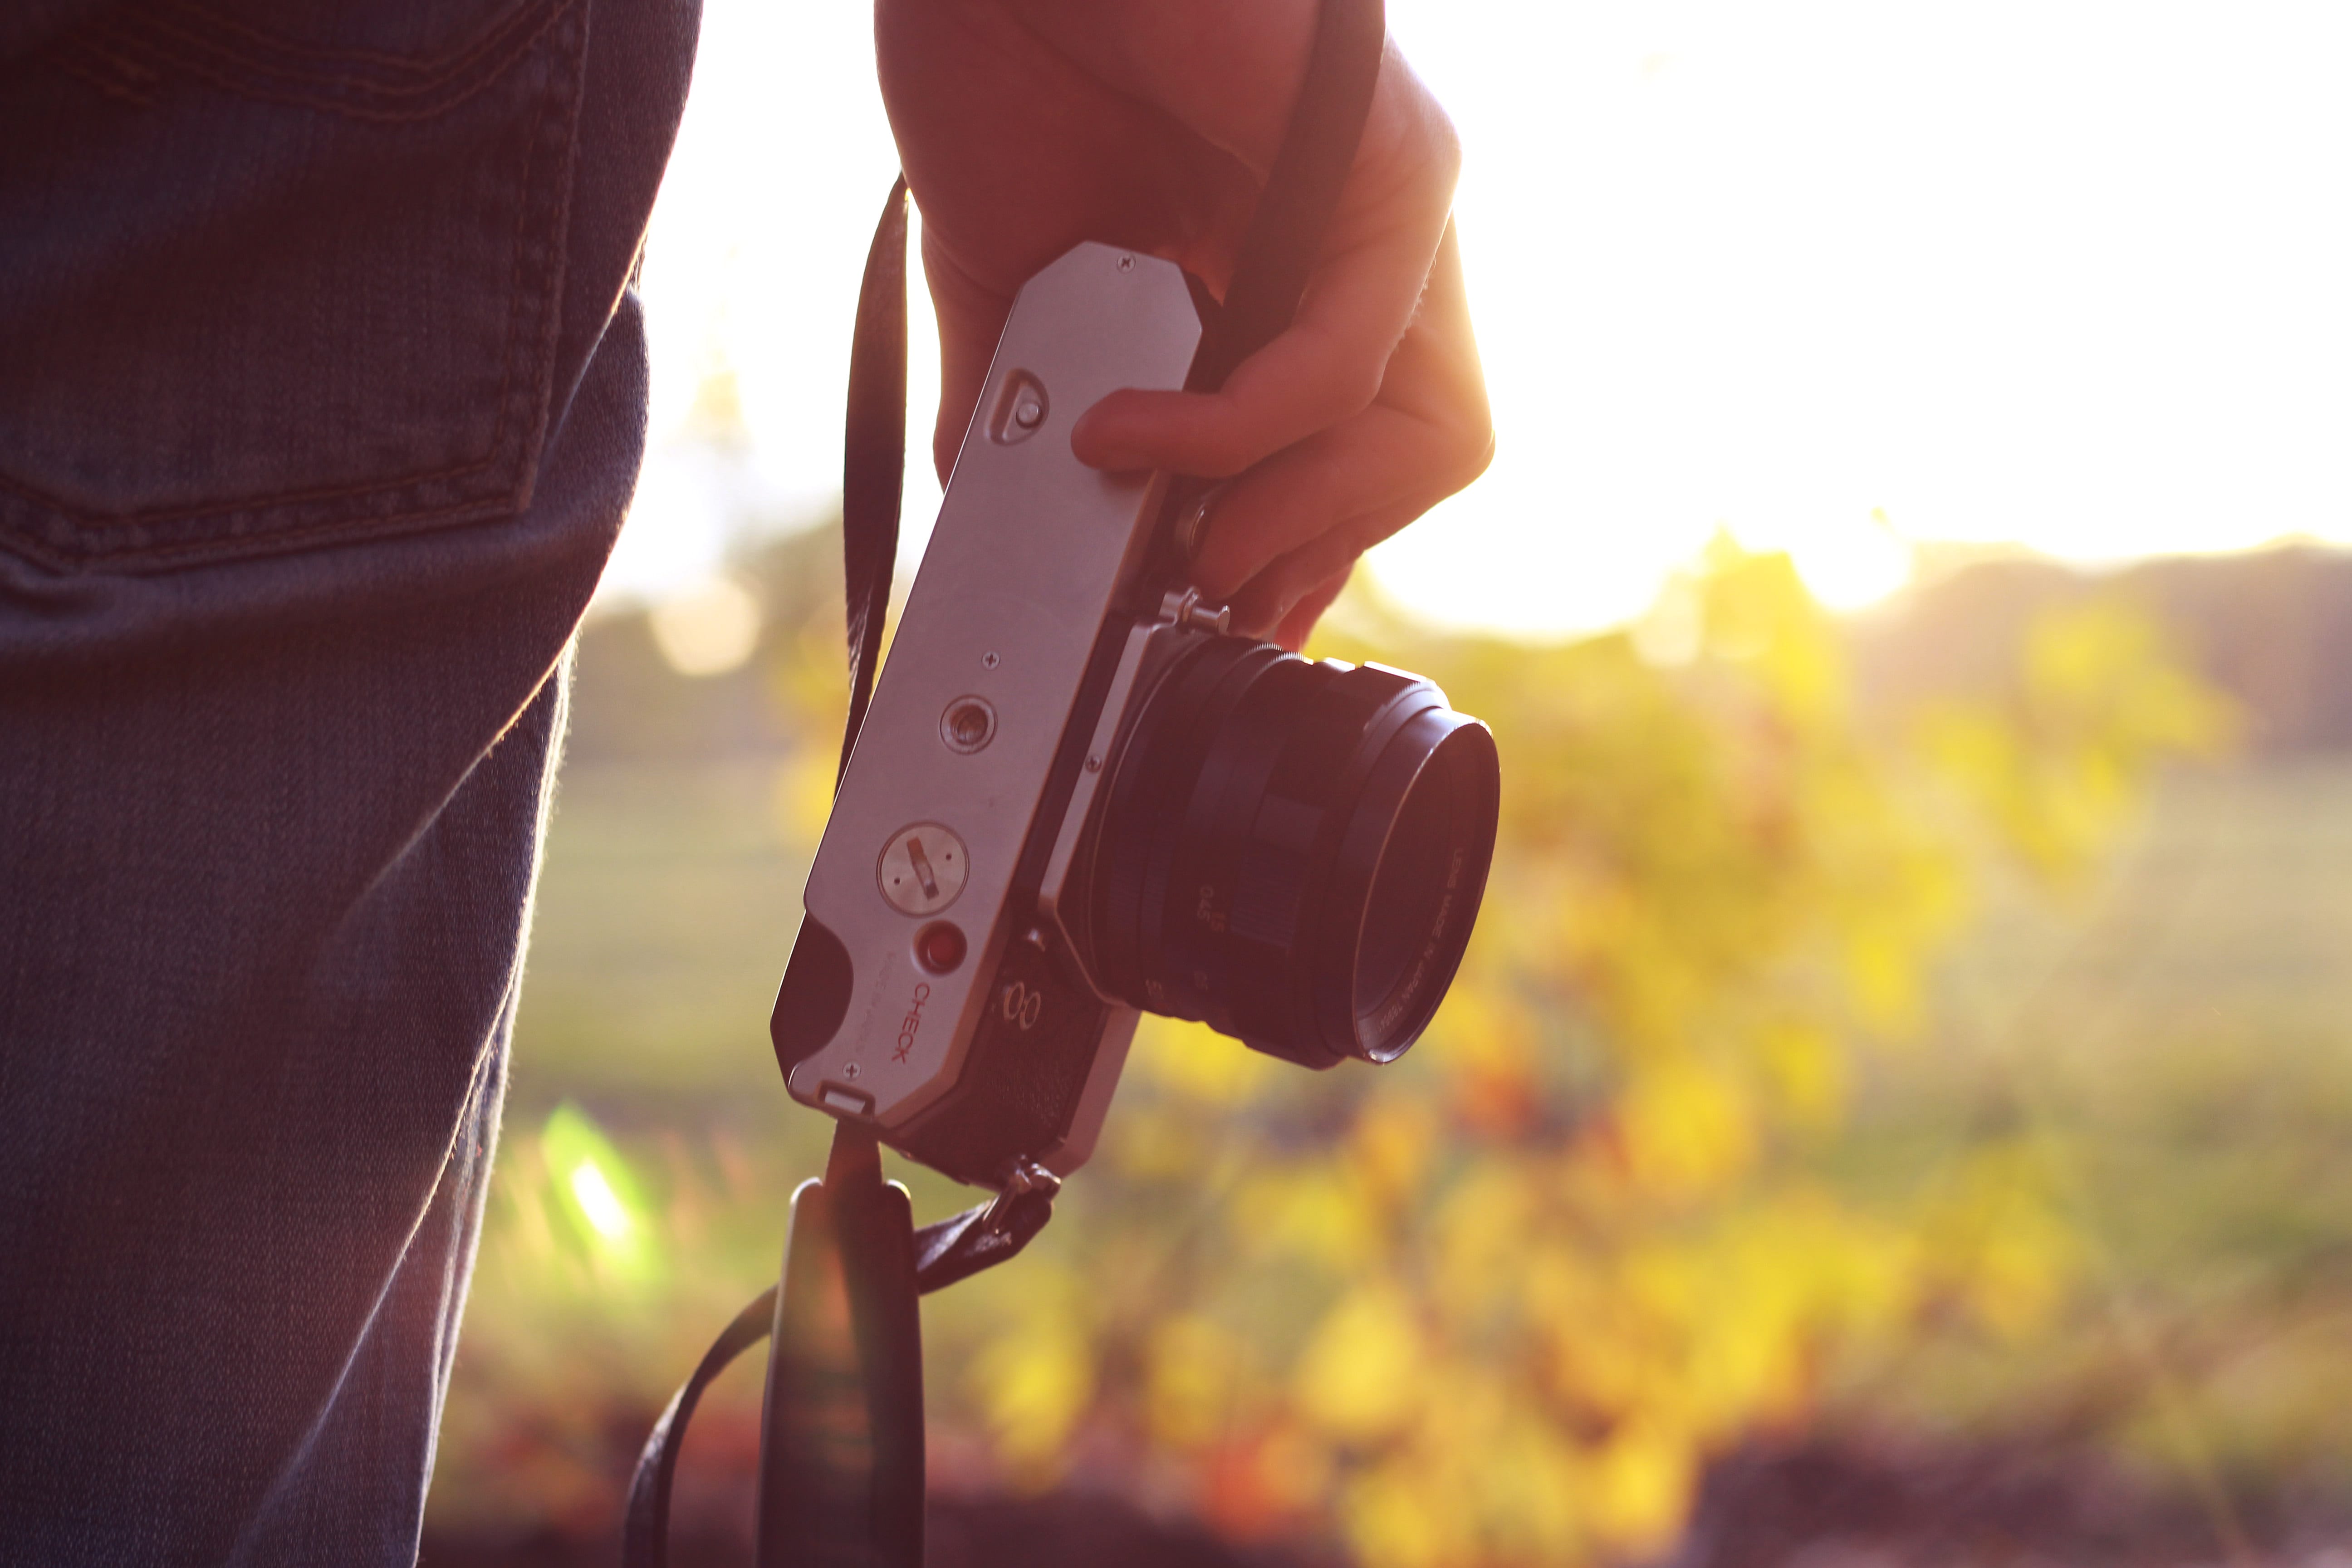 Beginner Photography: How to Take Pictures Like a Pro